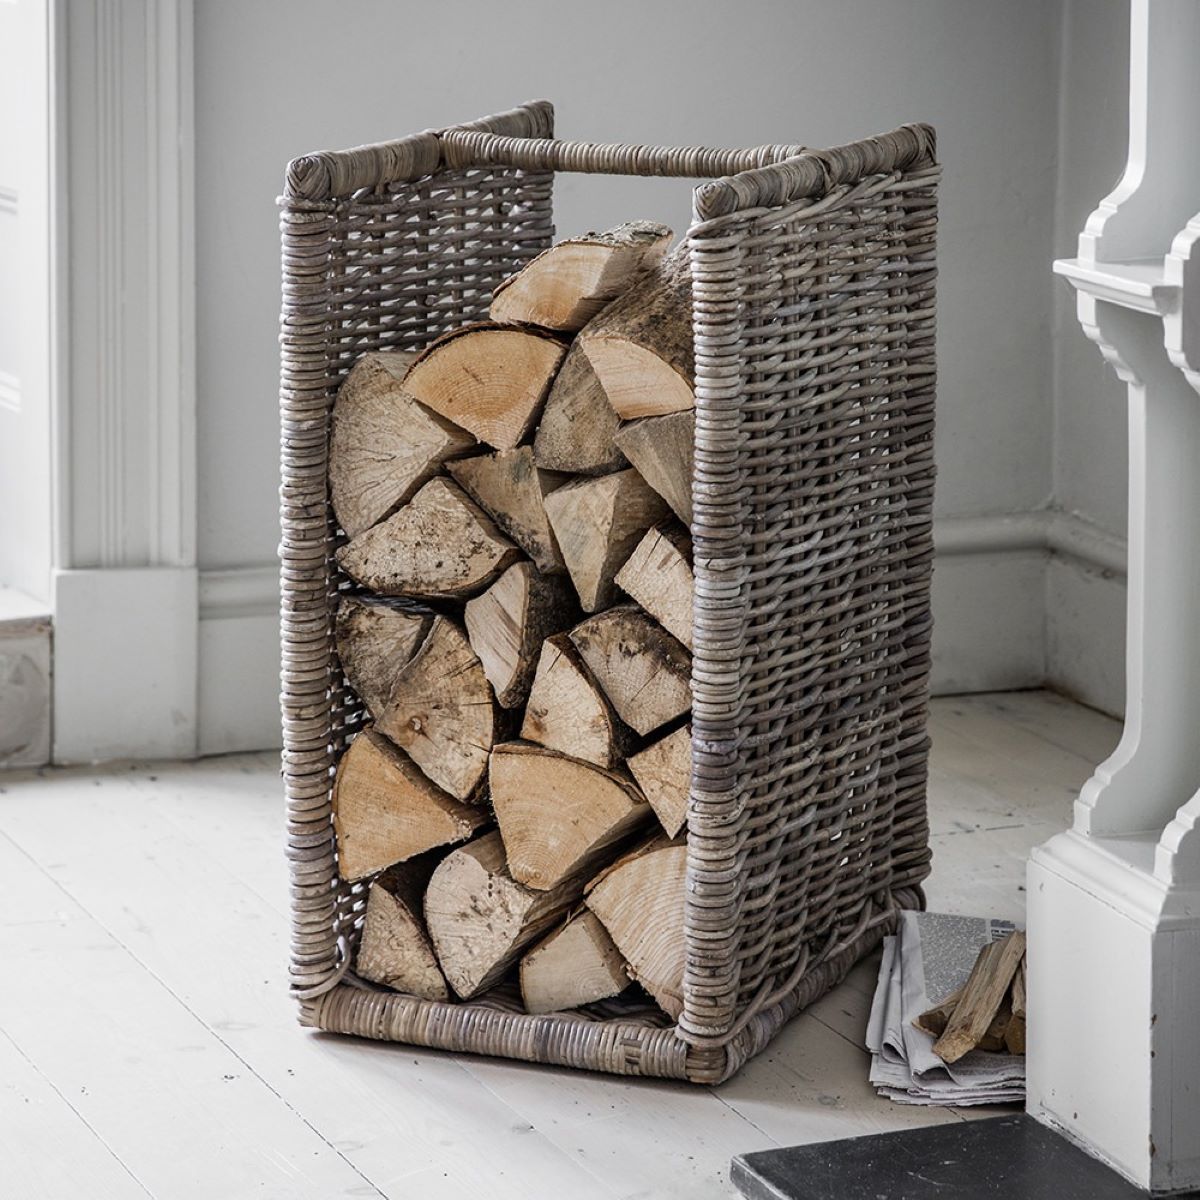 How To Store Logs